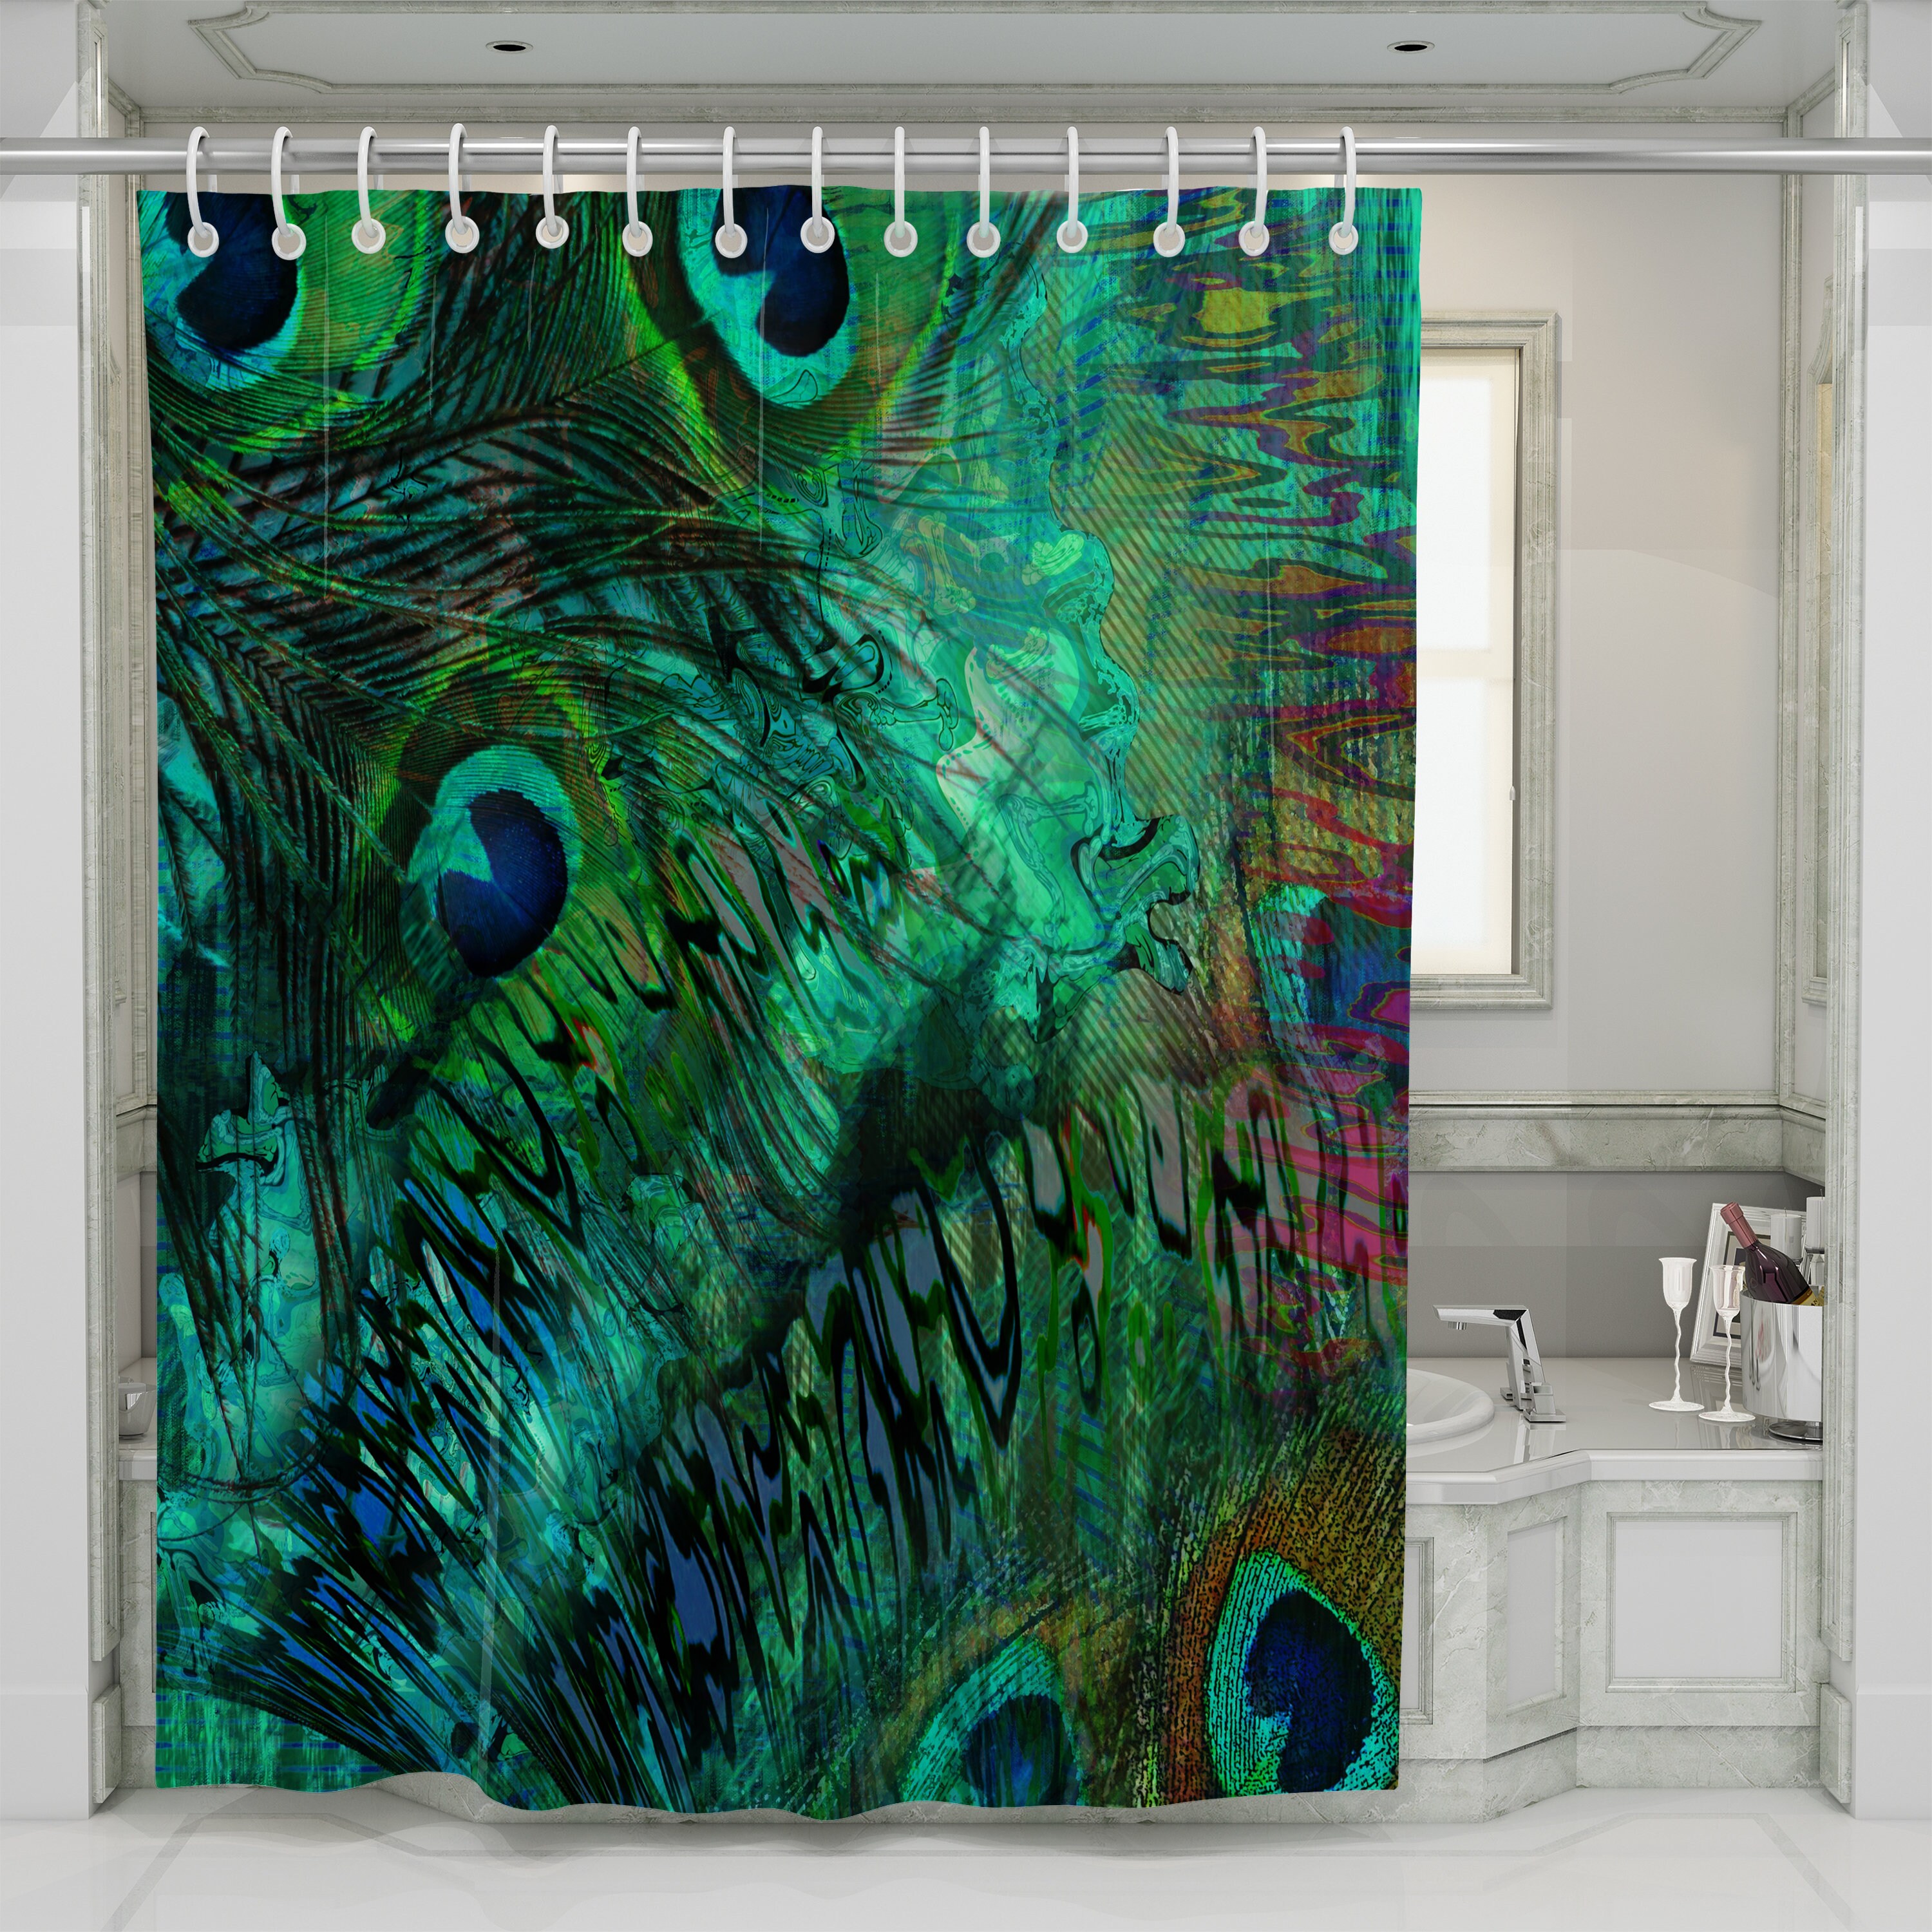 Hand Painting Colorful Flowers Peacock Feather Shower Curtain Set Bathroom Decor 